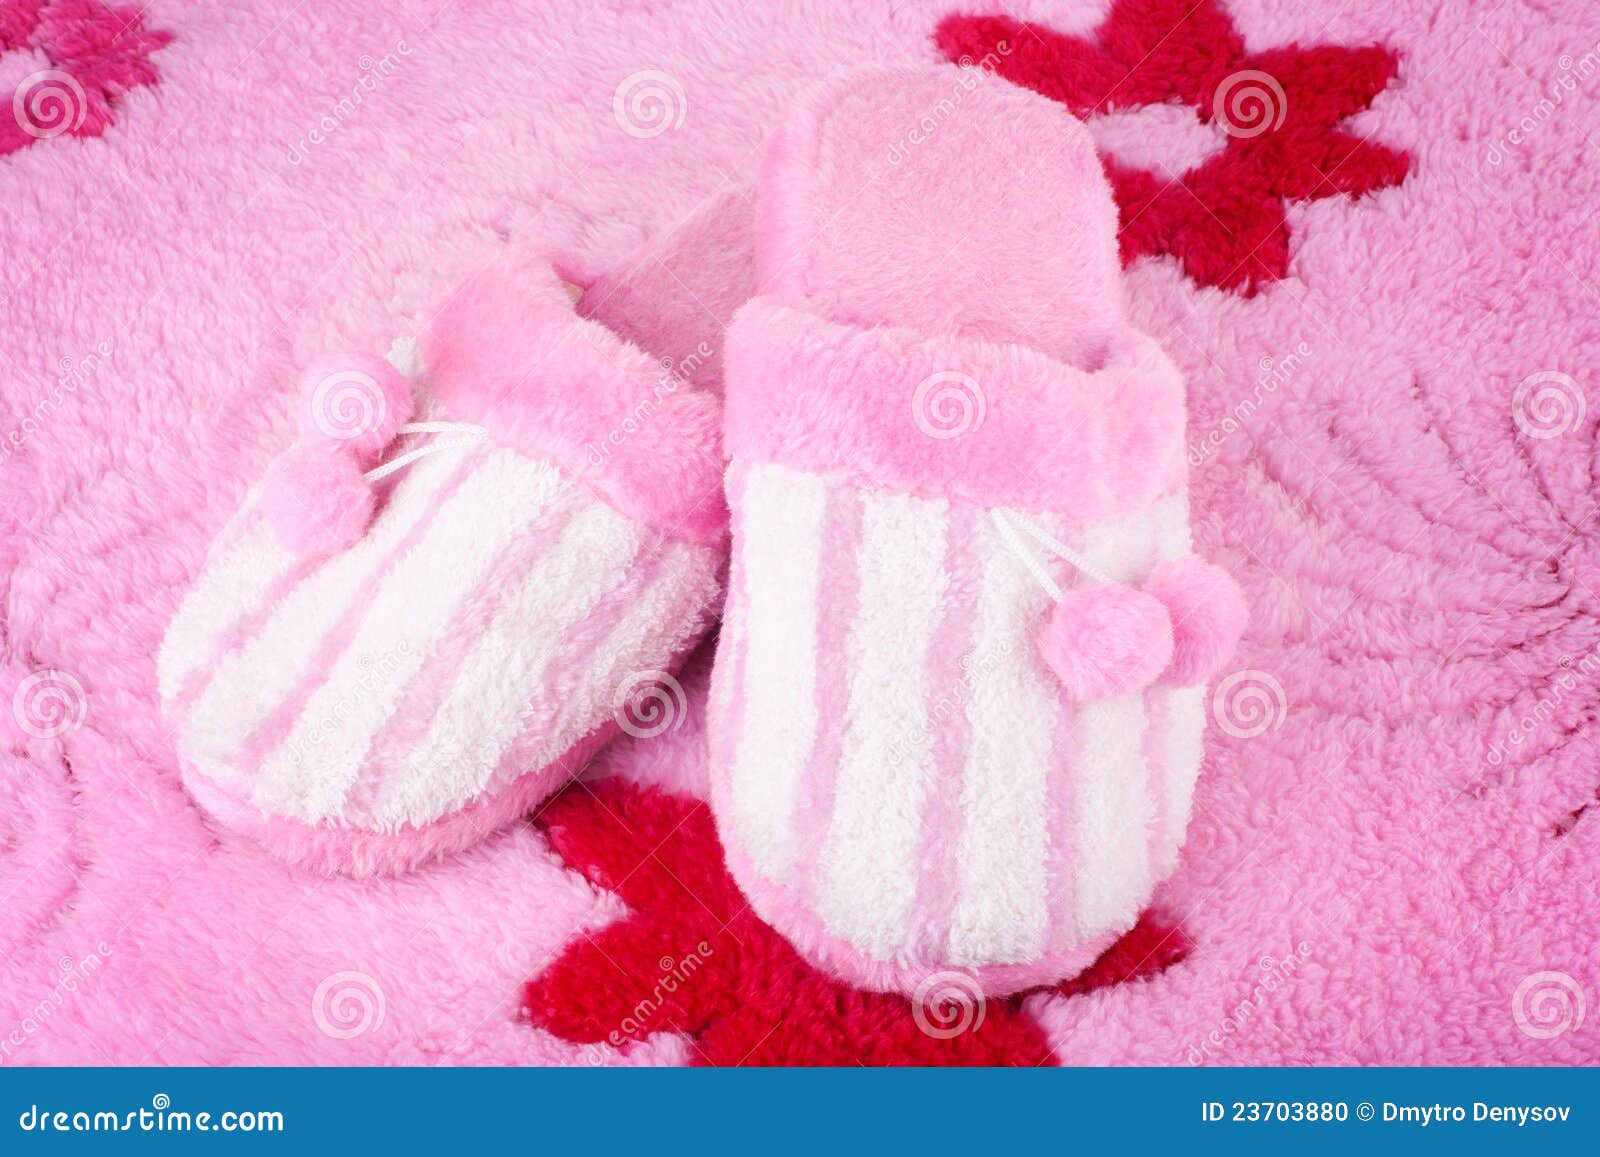 Pink home slippers stock photo. Image of domestic, fluffy - 23703880